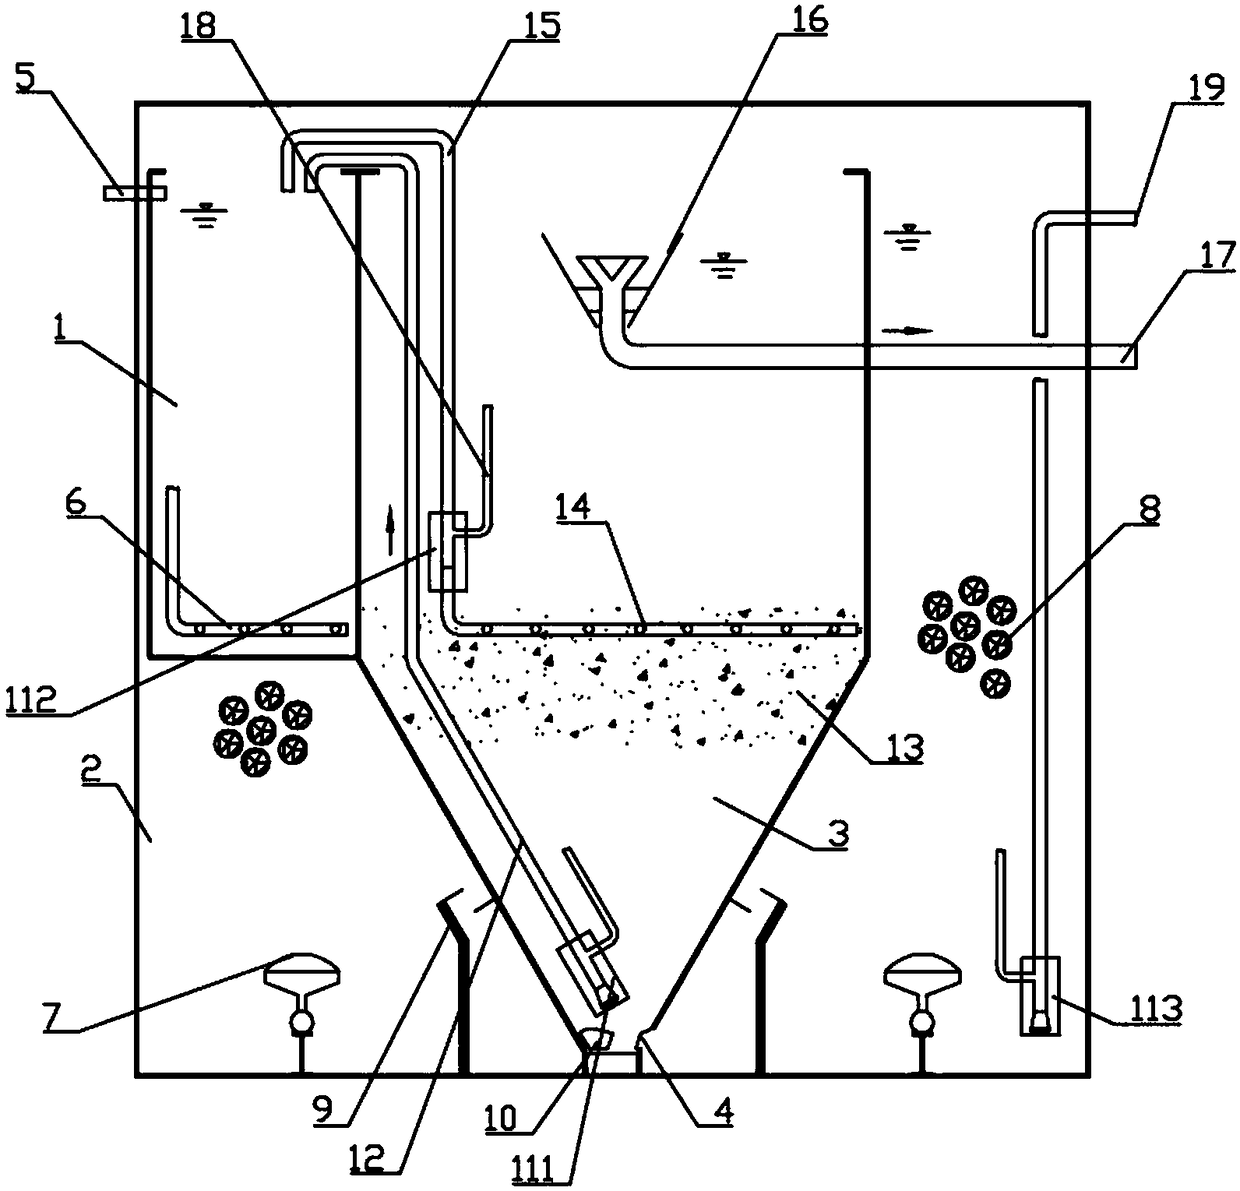 Device and process of distributed domestic sewage treatment